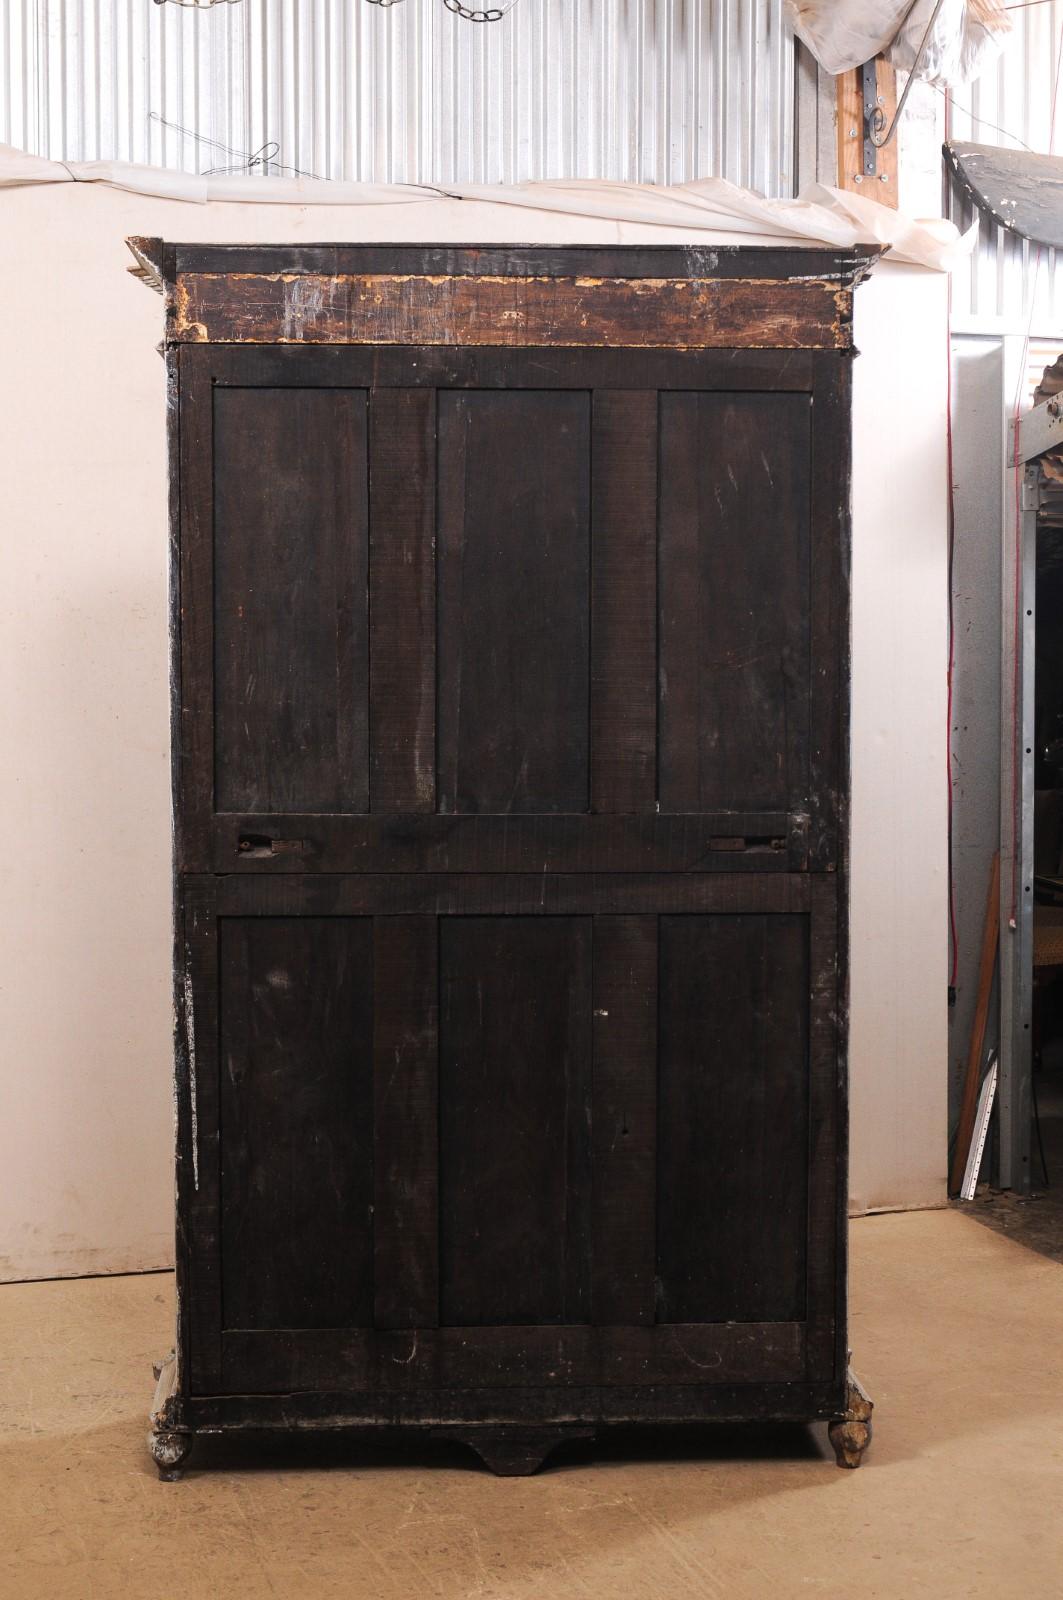 French Carved and Painted Wood Cabinet with Upper Glass Doors for Display 1